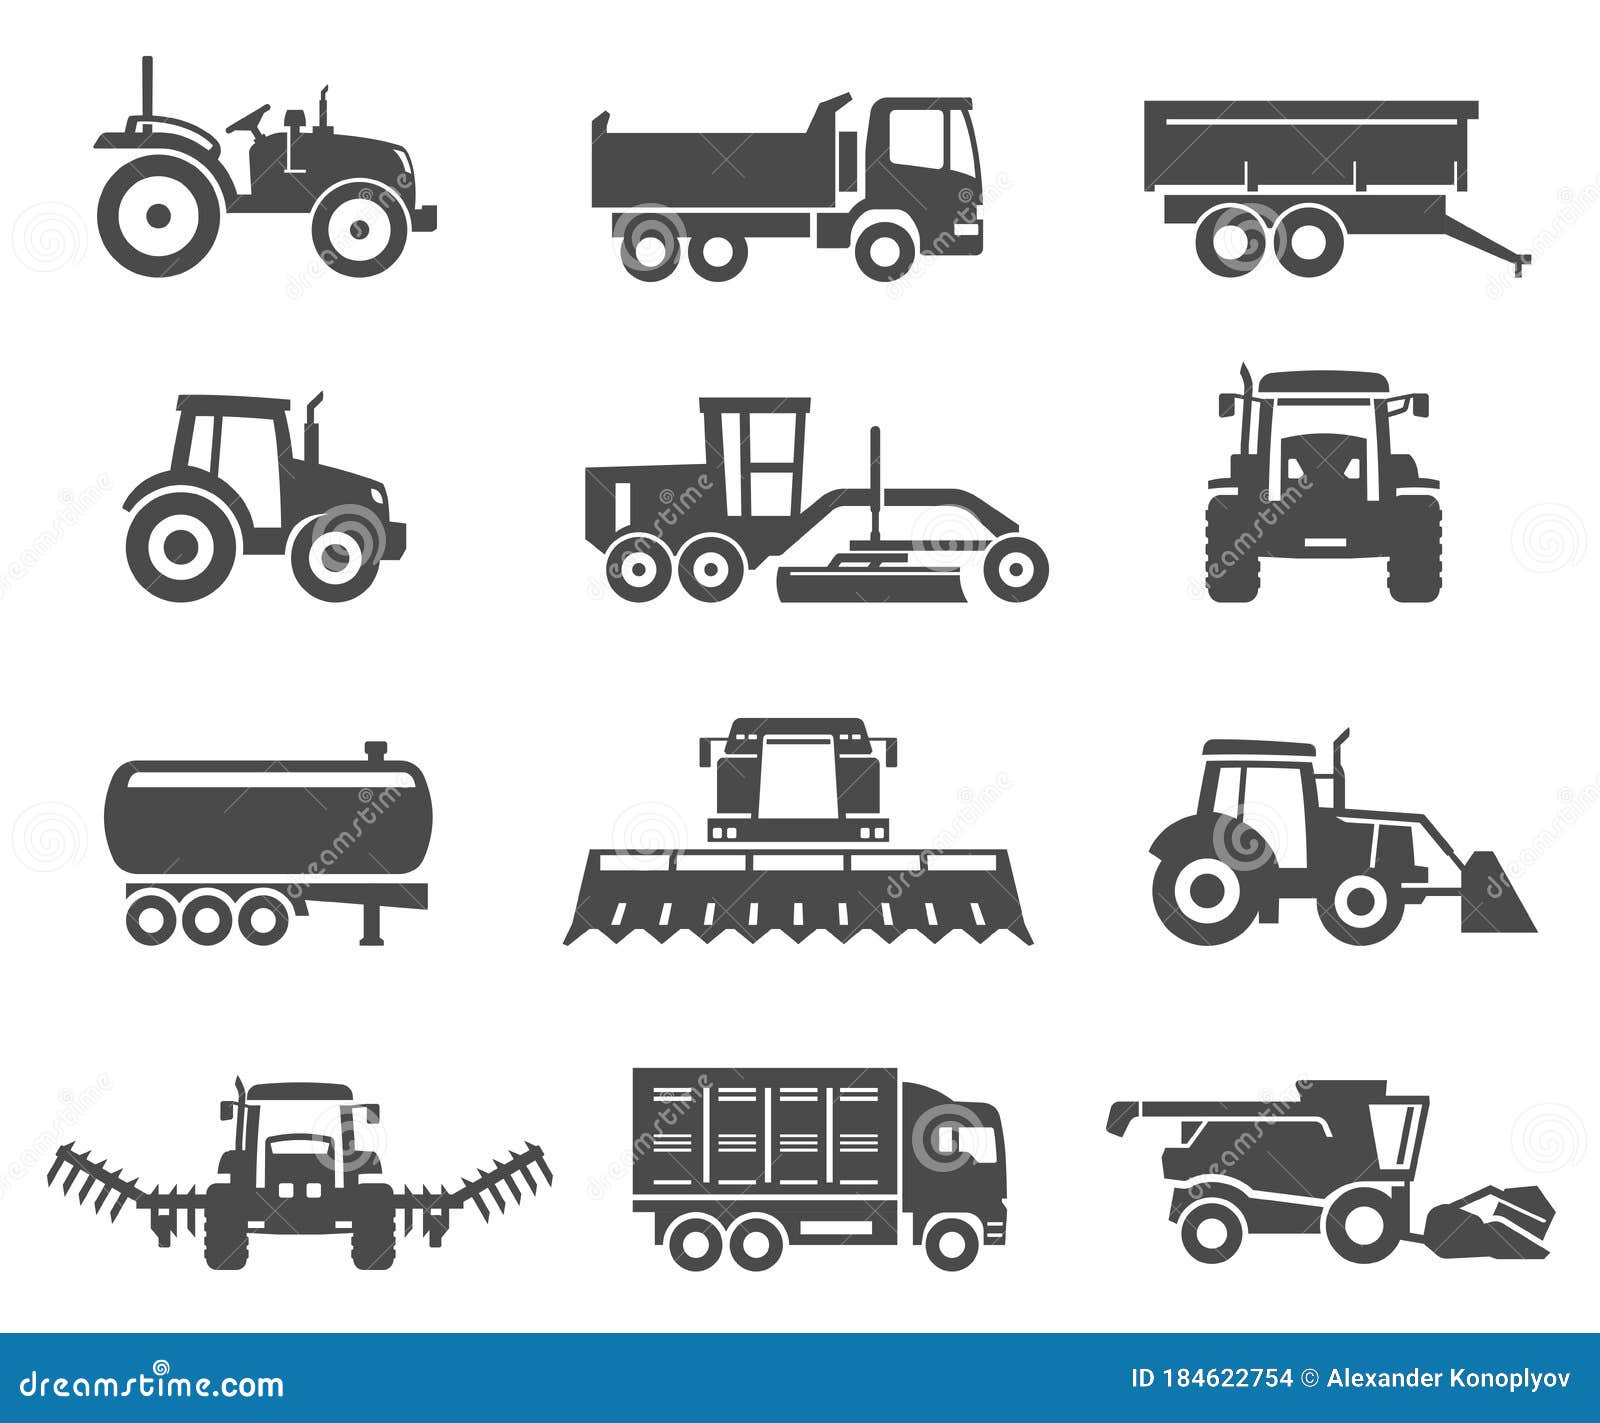 agricultural machinery, vehicles black silhouette icons set  on white.